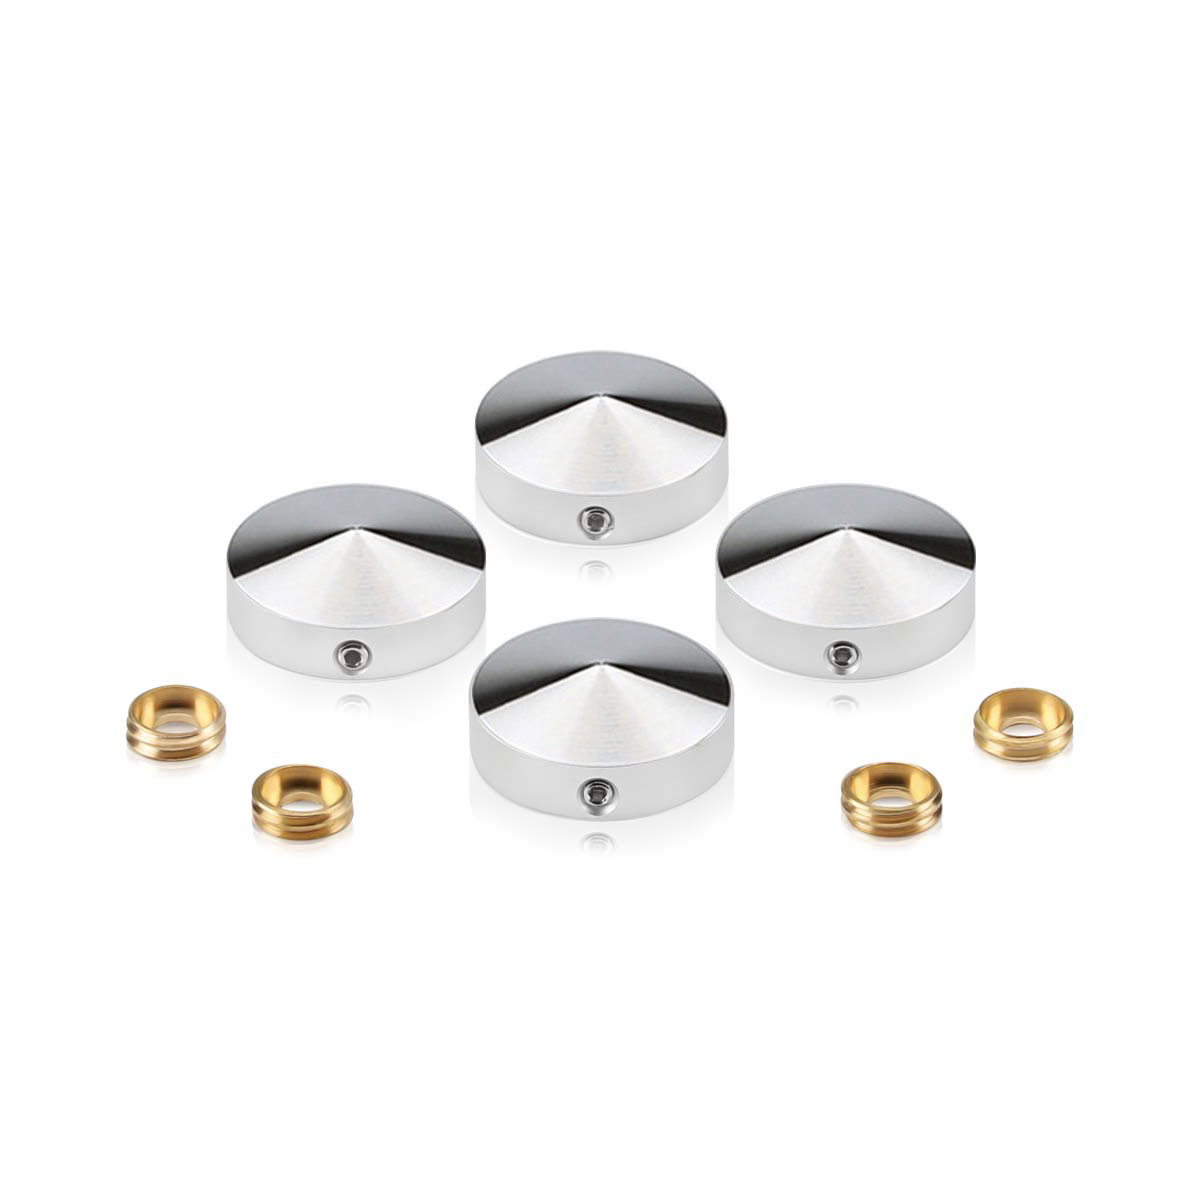 Set of 4 Conical Locking Screw Cover Diameter 1'', Satin Brushed Stainless Steel Finish (Indoor or Outdoor)